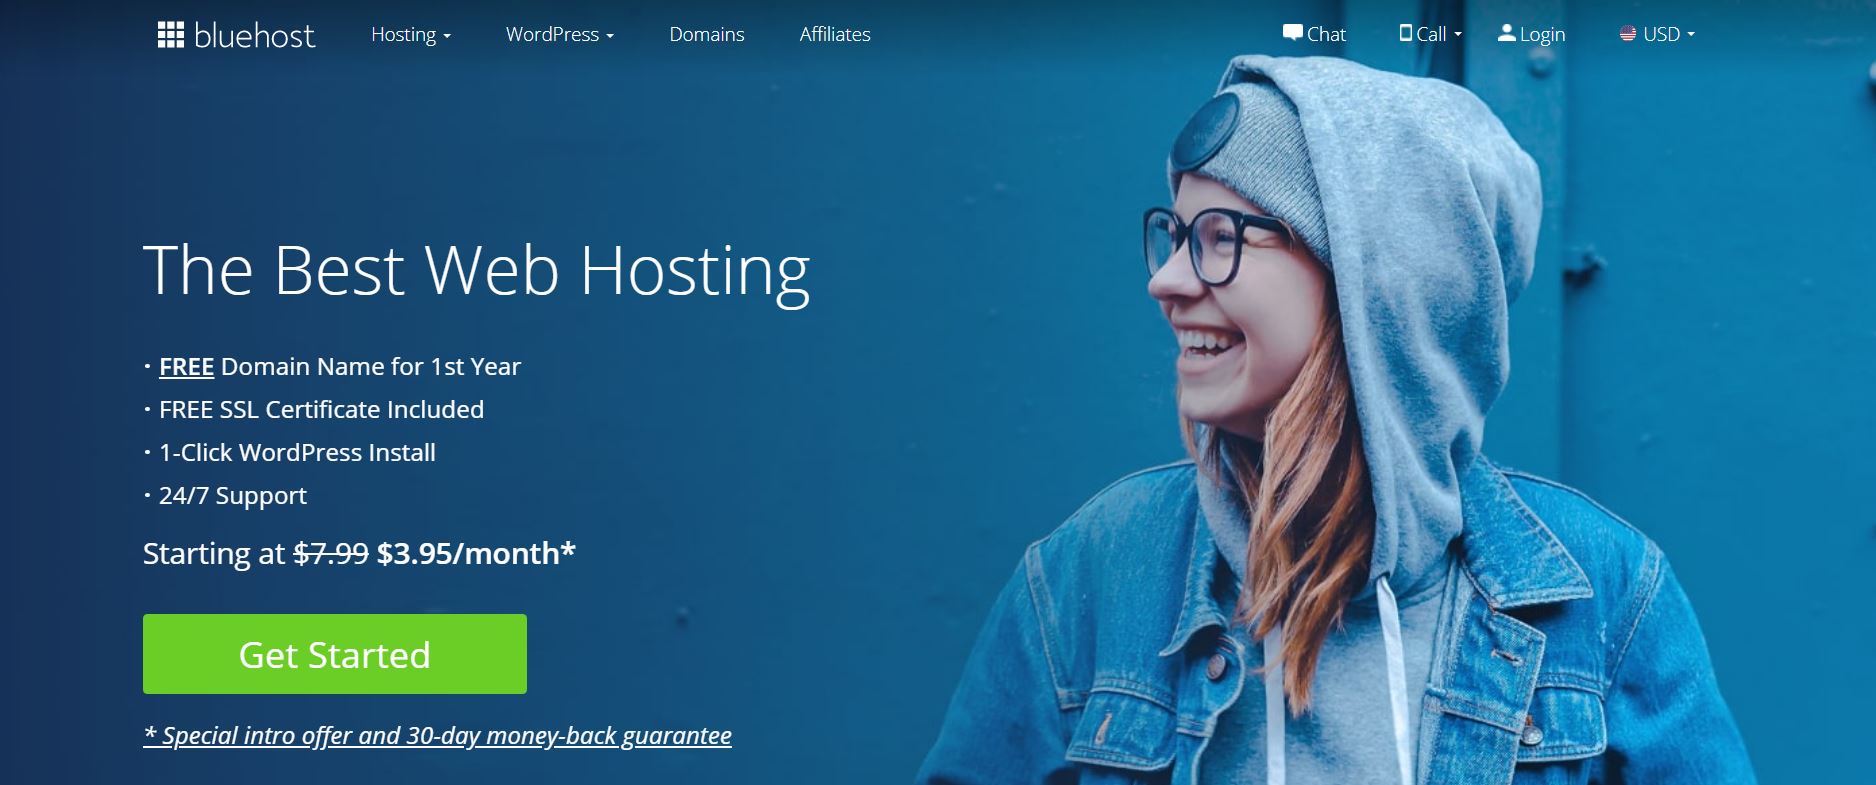 about bluehost